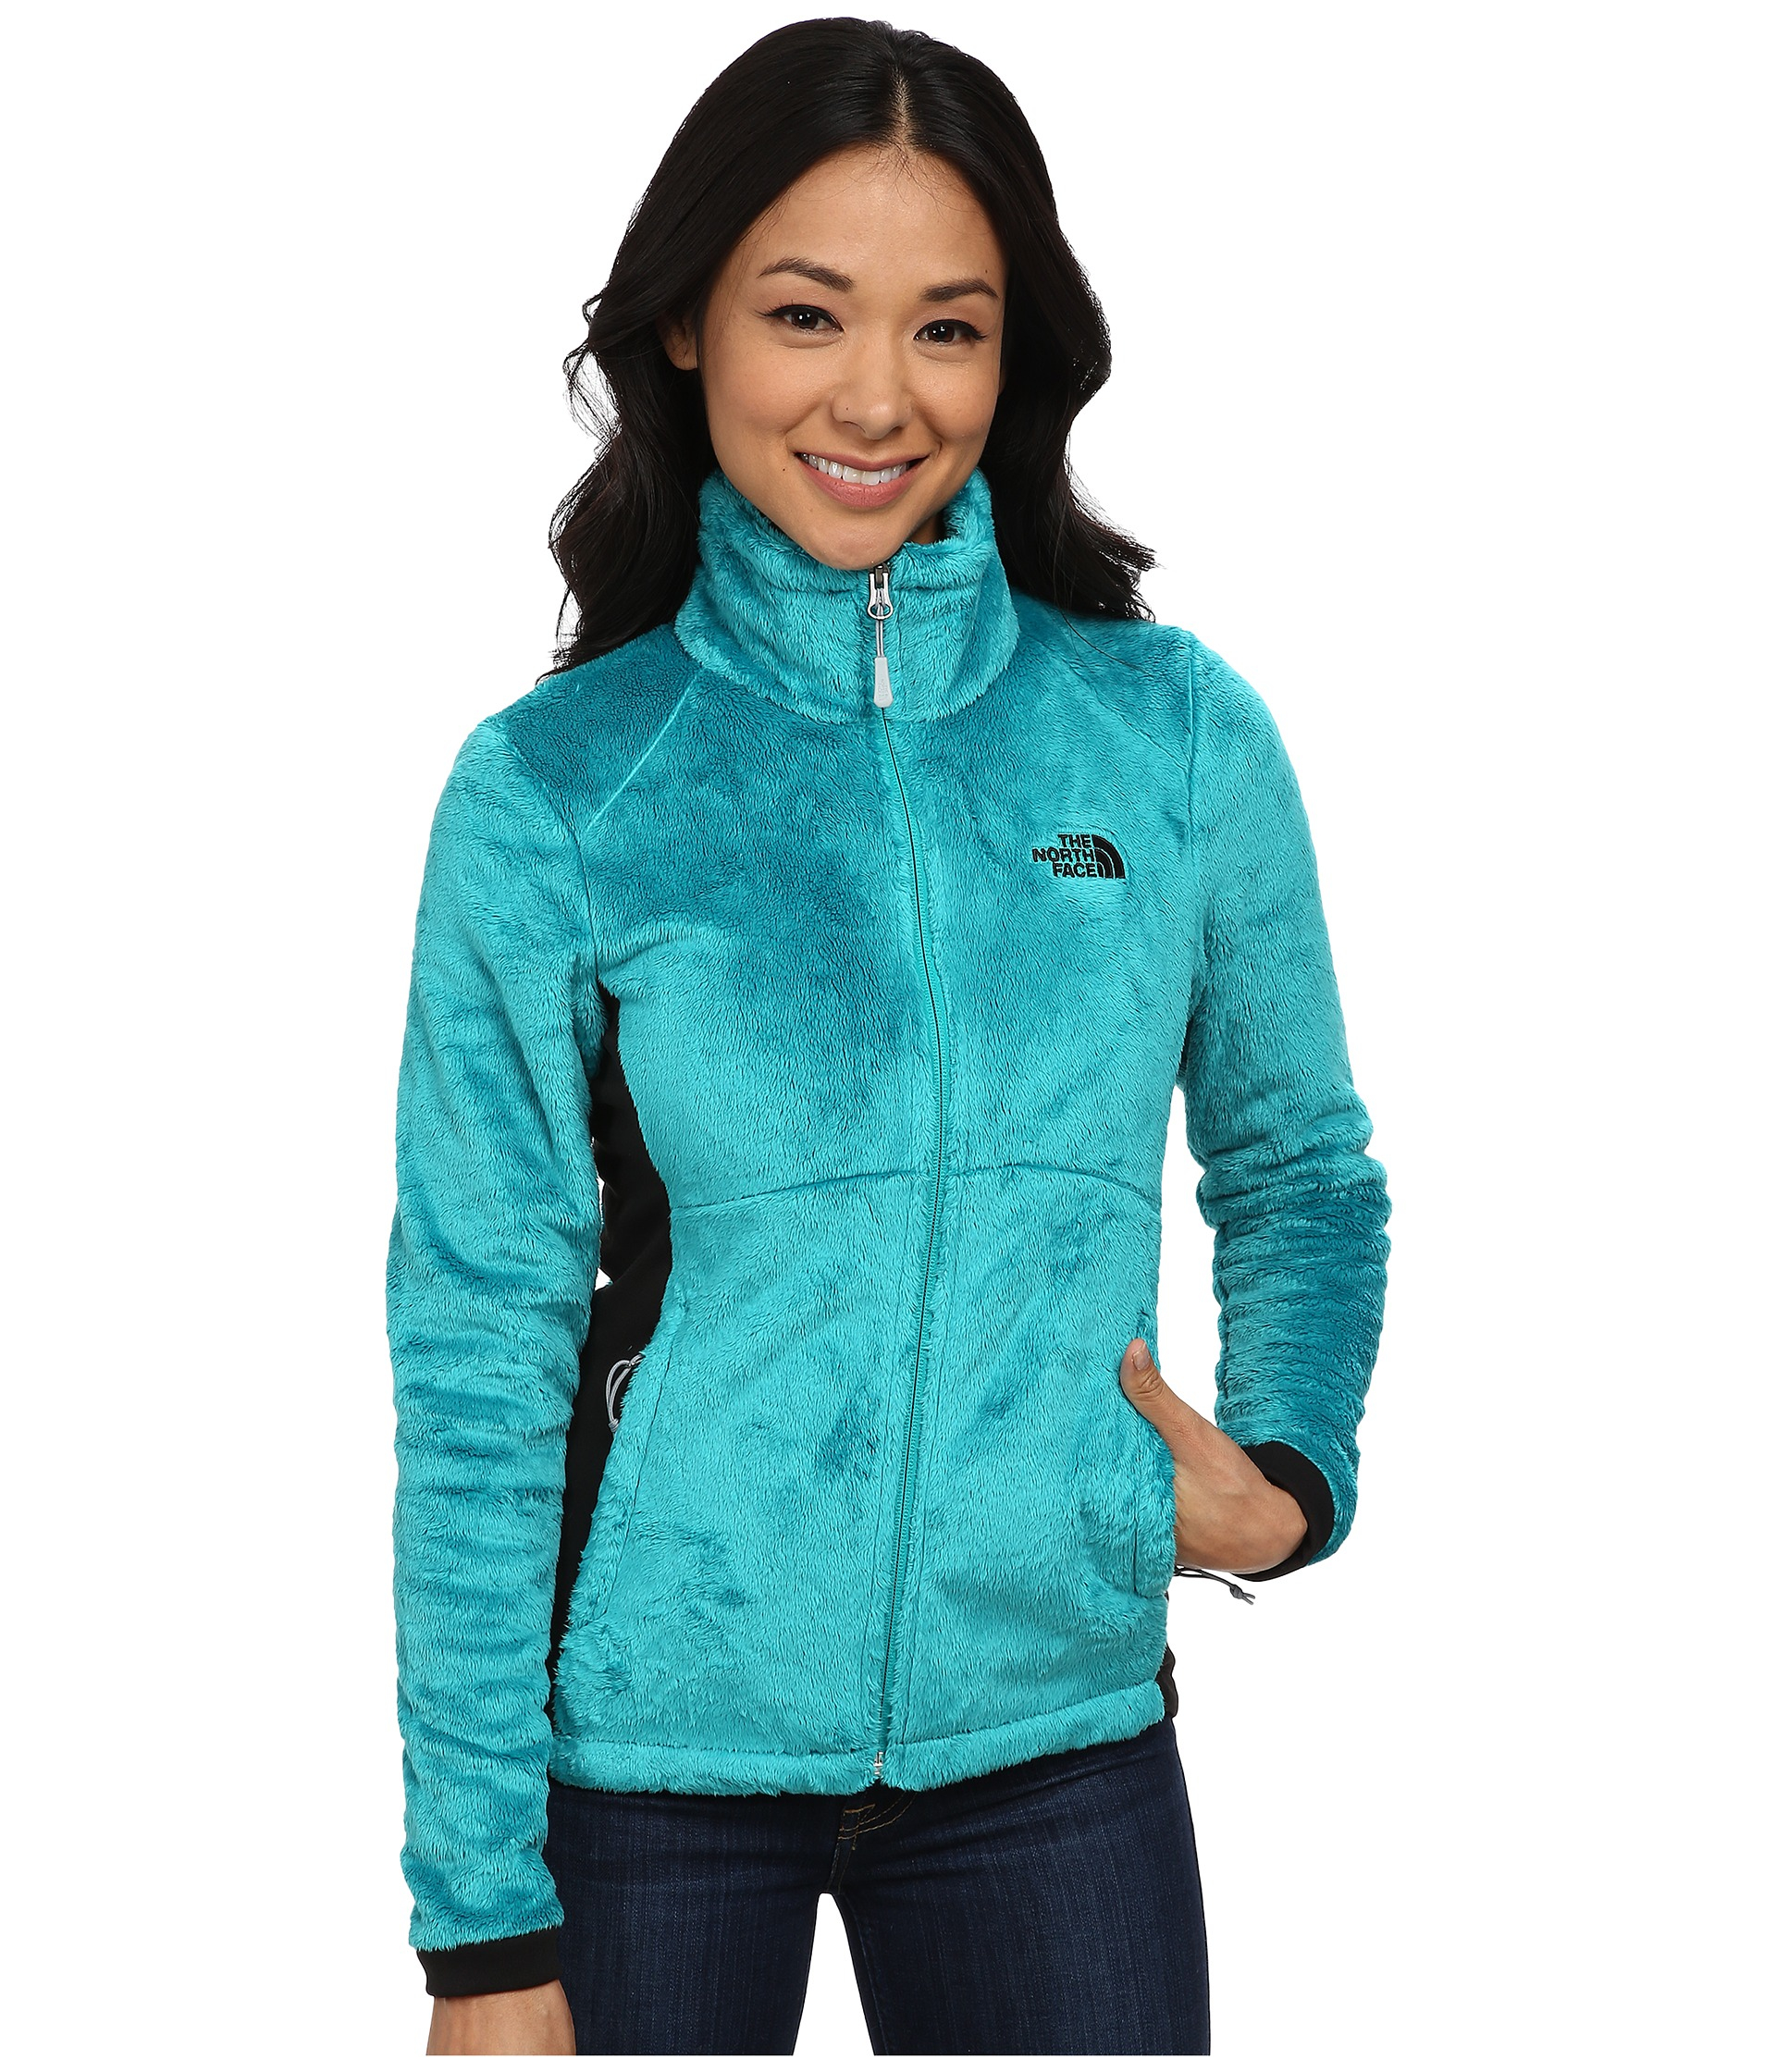 Osito North Face Womens Jacket Sale Online Shopping For Women Men Kids Fashion Lifestyle Free Delivery Returns